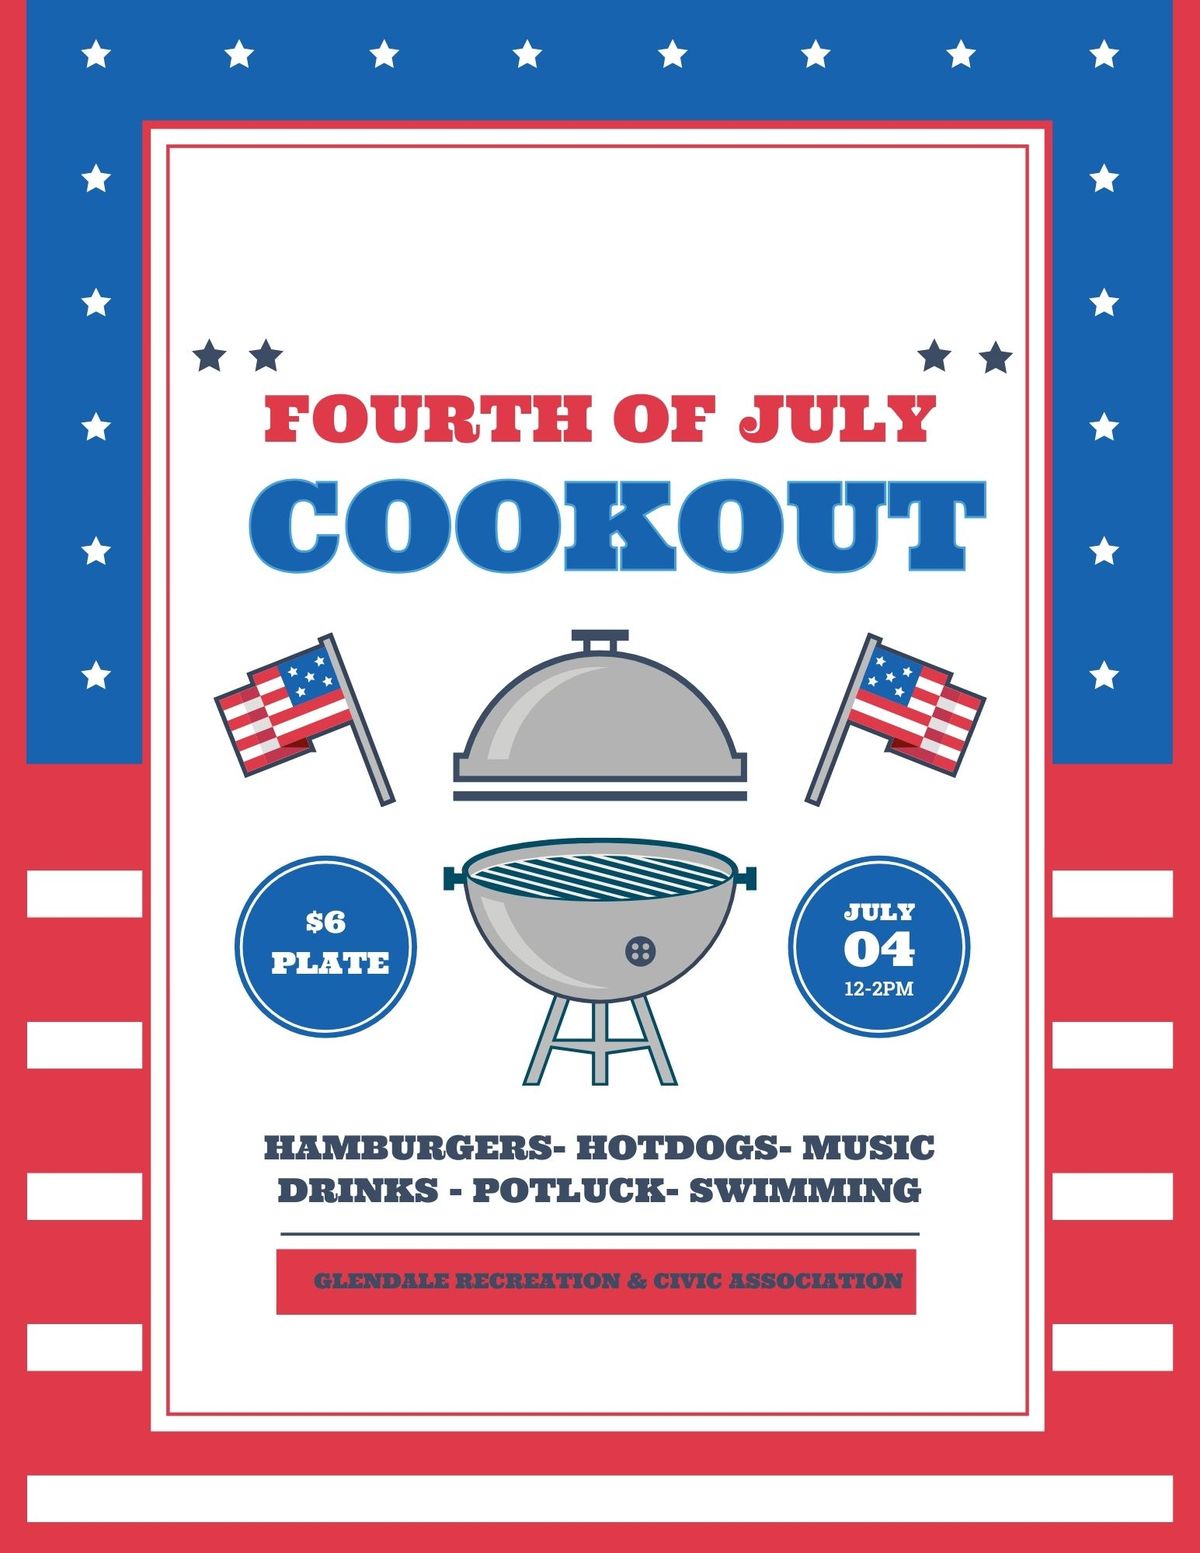 Celebrate 4th of July Cookout!